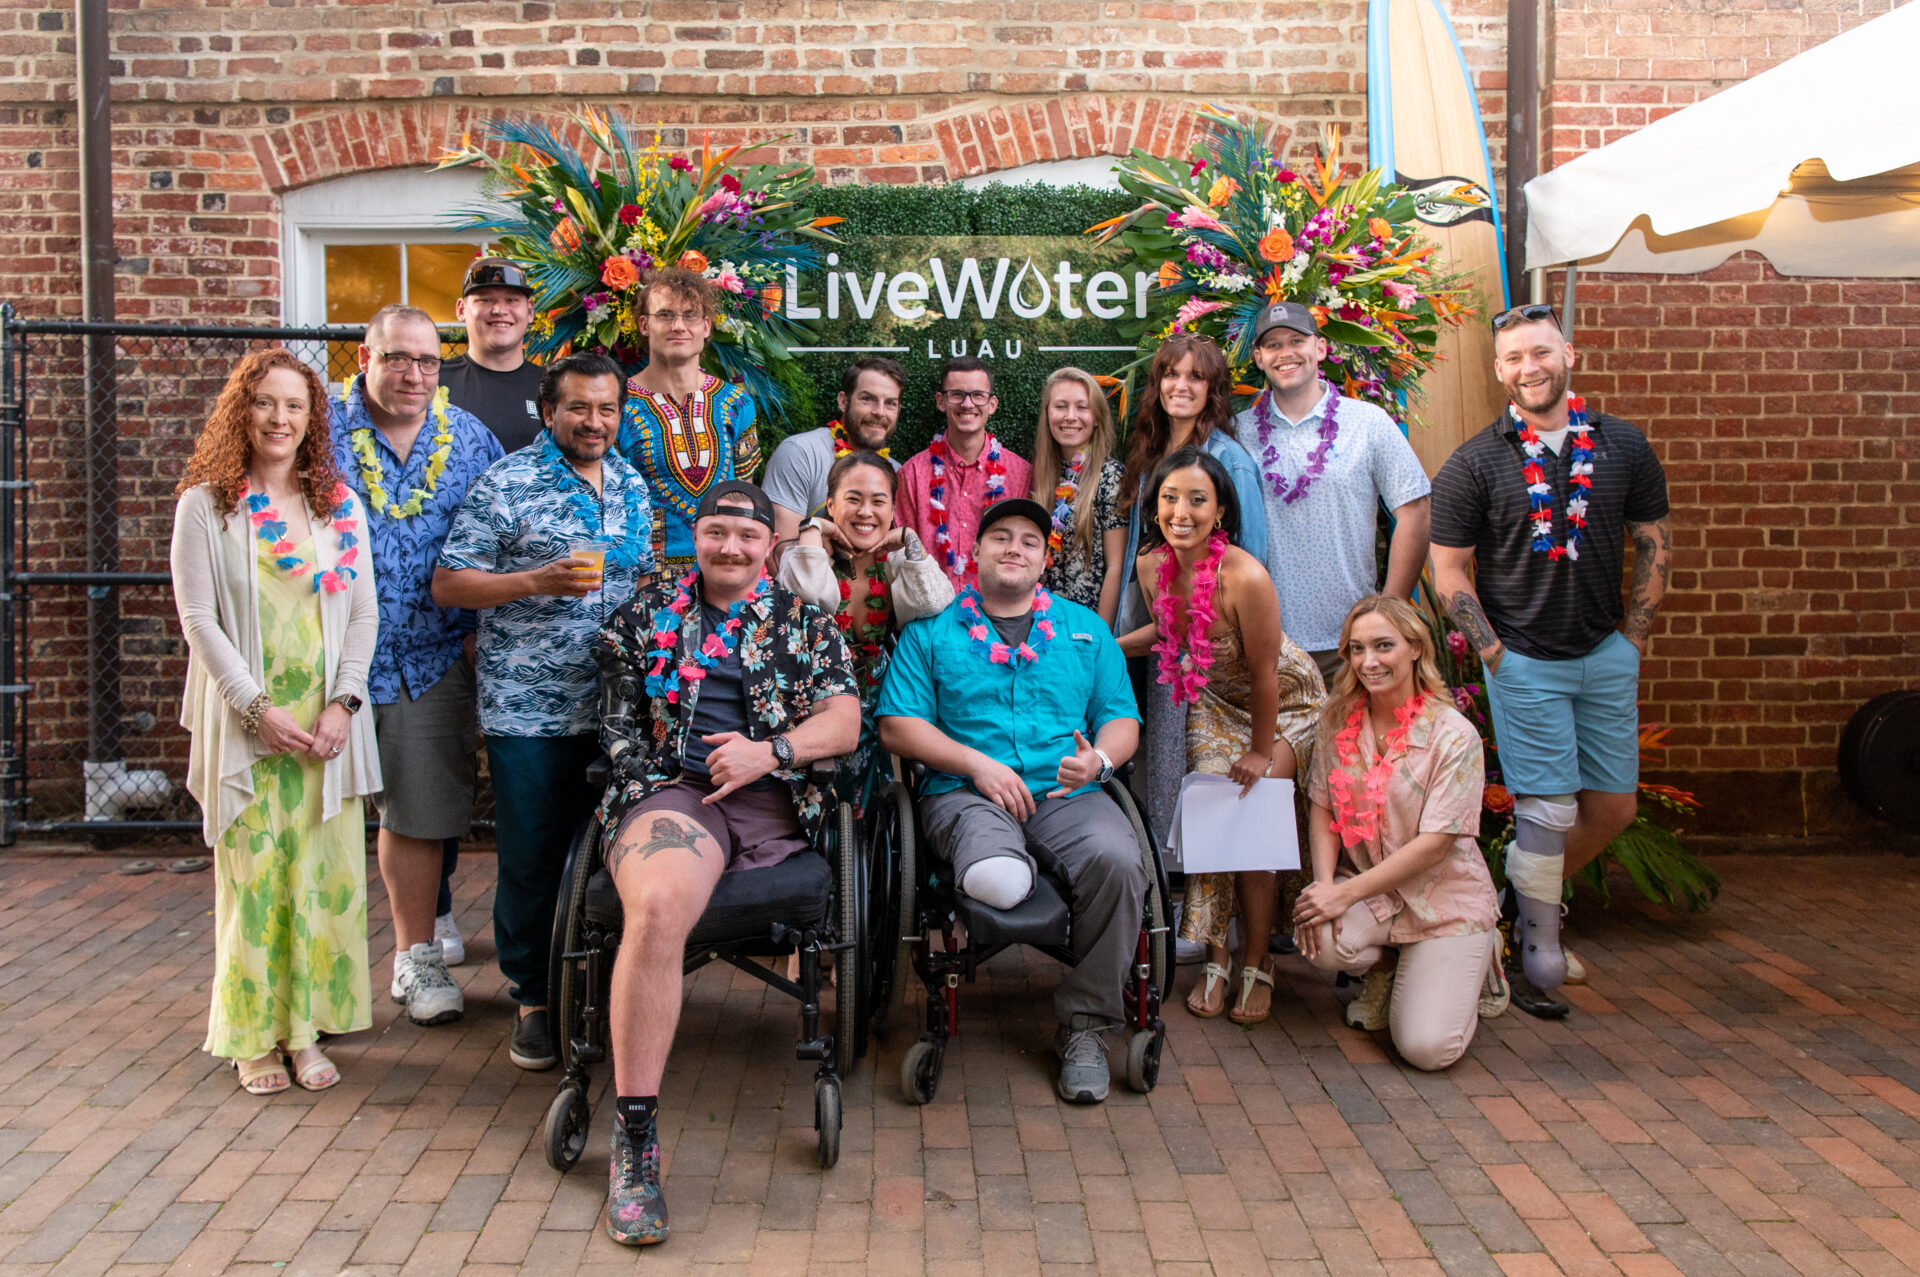 A group of Wounded Warrior participants, including Gaby, pose for a photo in front of a floral backdrop at the Live Water Luau.